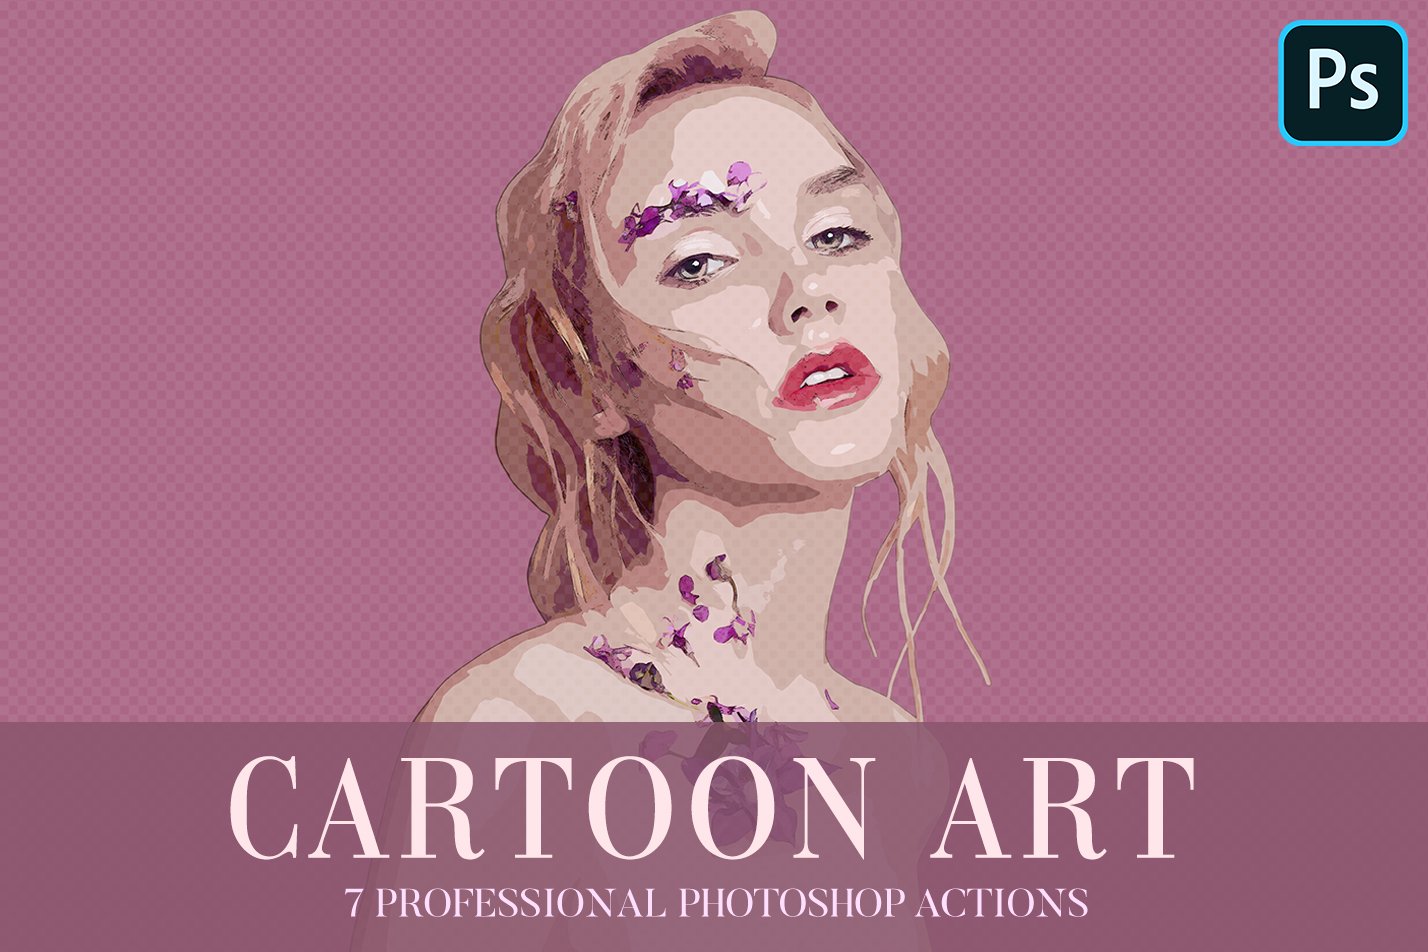 Photoshop Actions - Cartoon Artcover image.